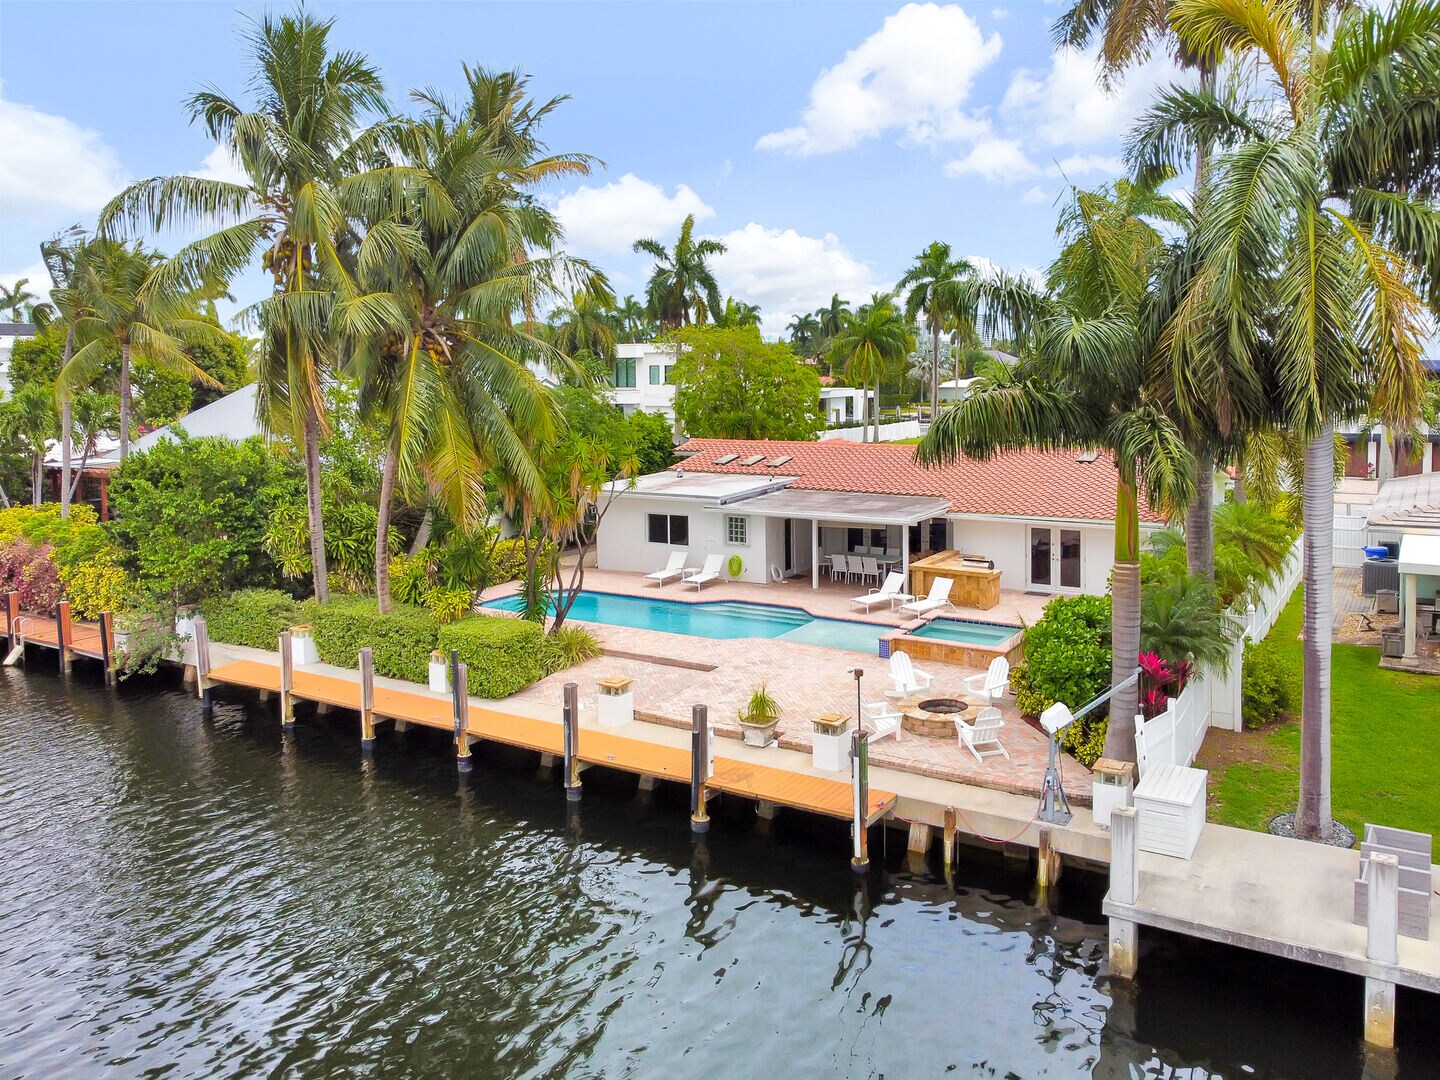 House is situated directly on the water, this yard is full of nature, fresh air and tranquility